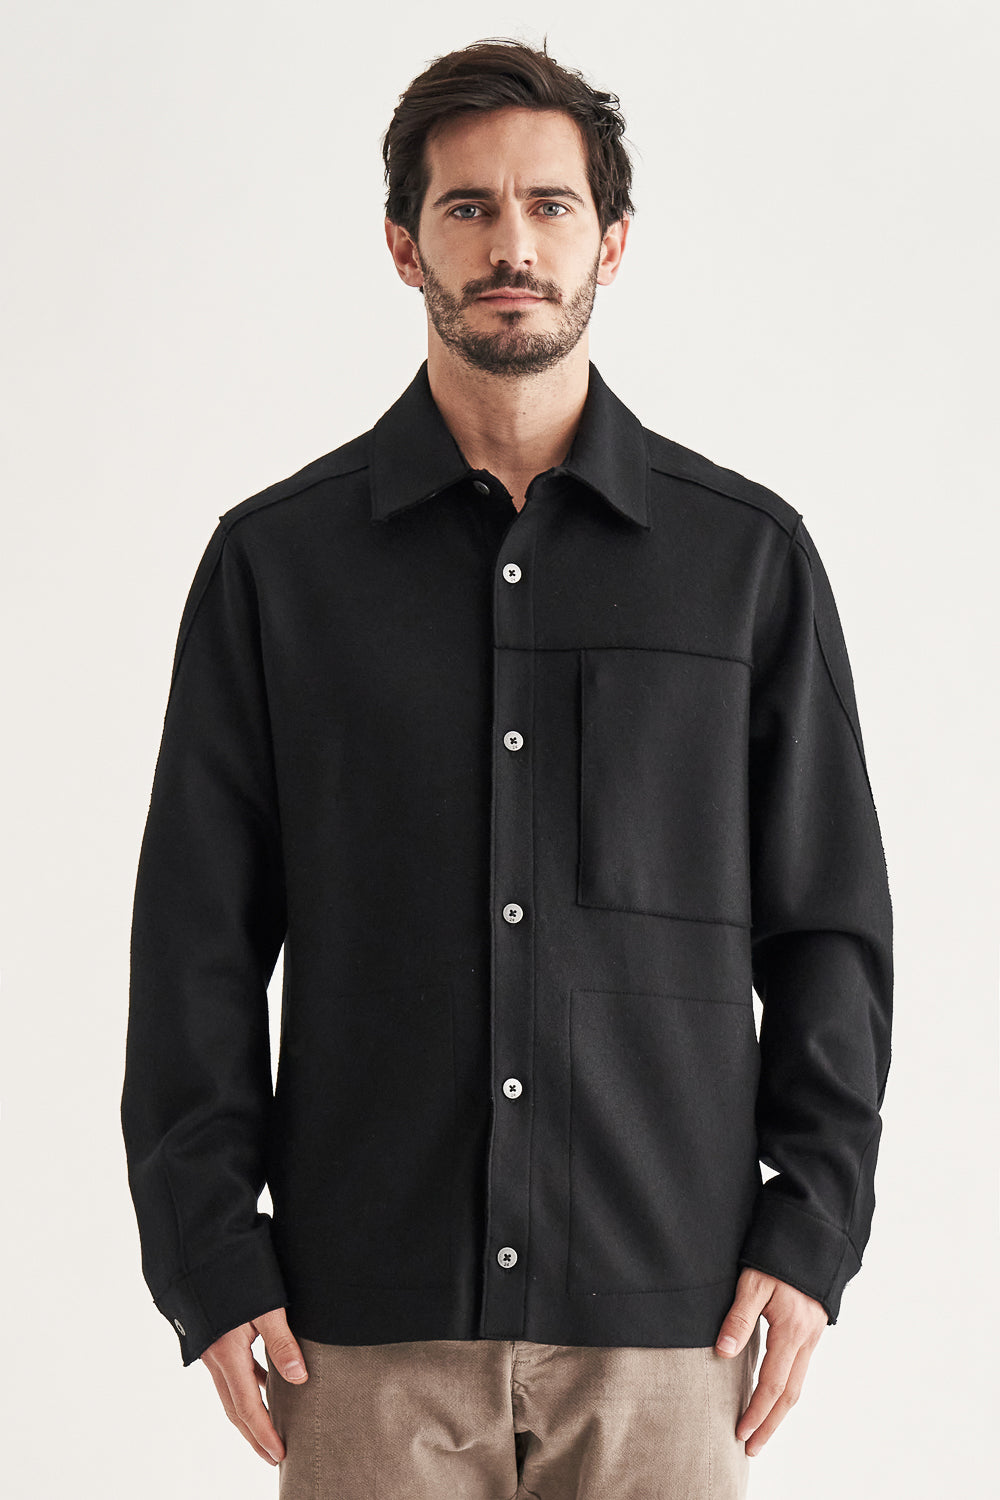 Buy the Transit Virgin Wool Overshirt in Black at Intro. Spend £50 for free UK delivery. Official stockists. We ship worldwide.